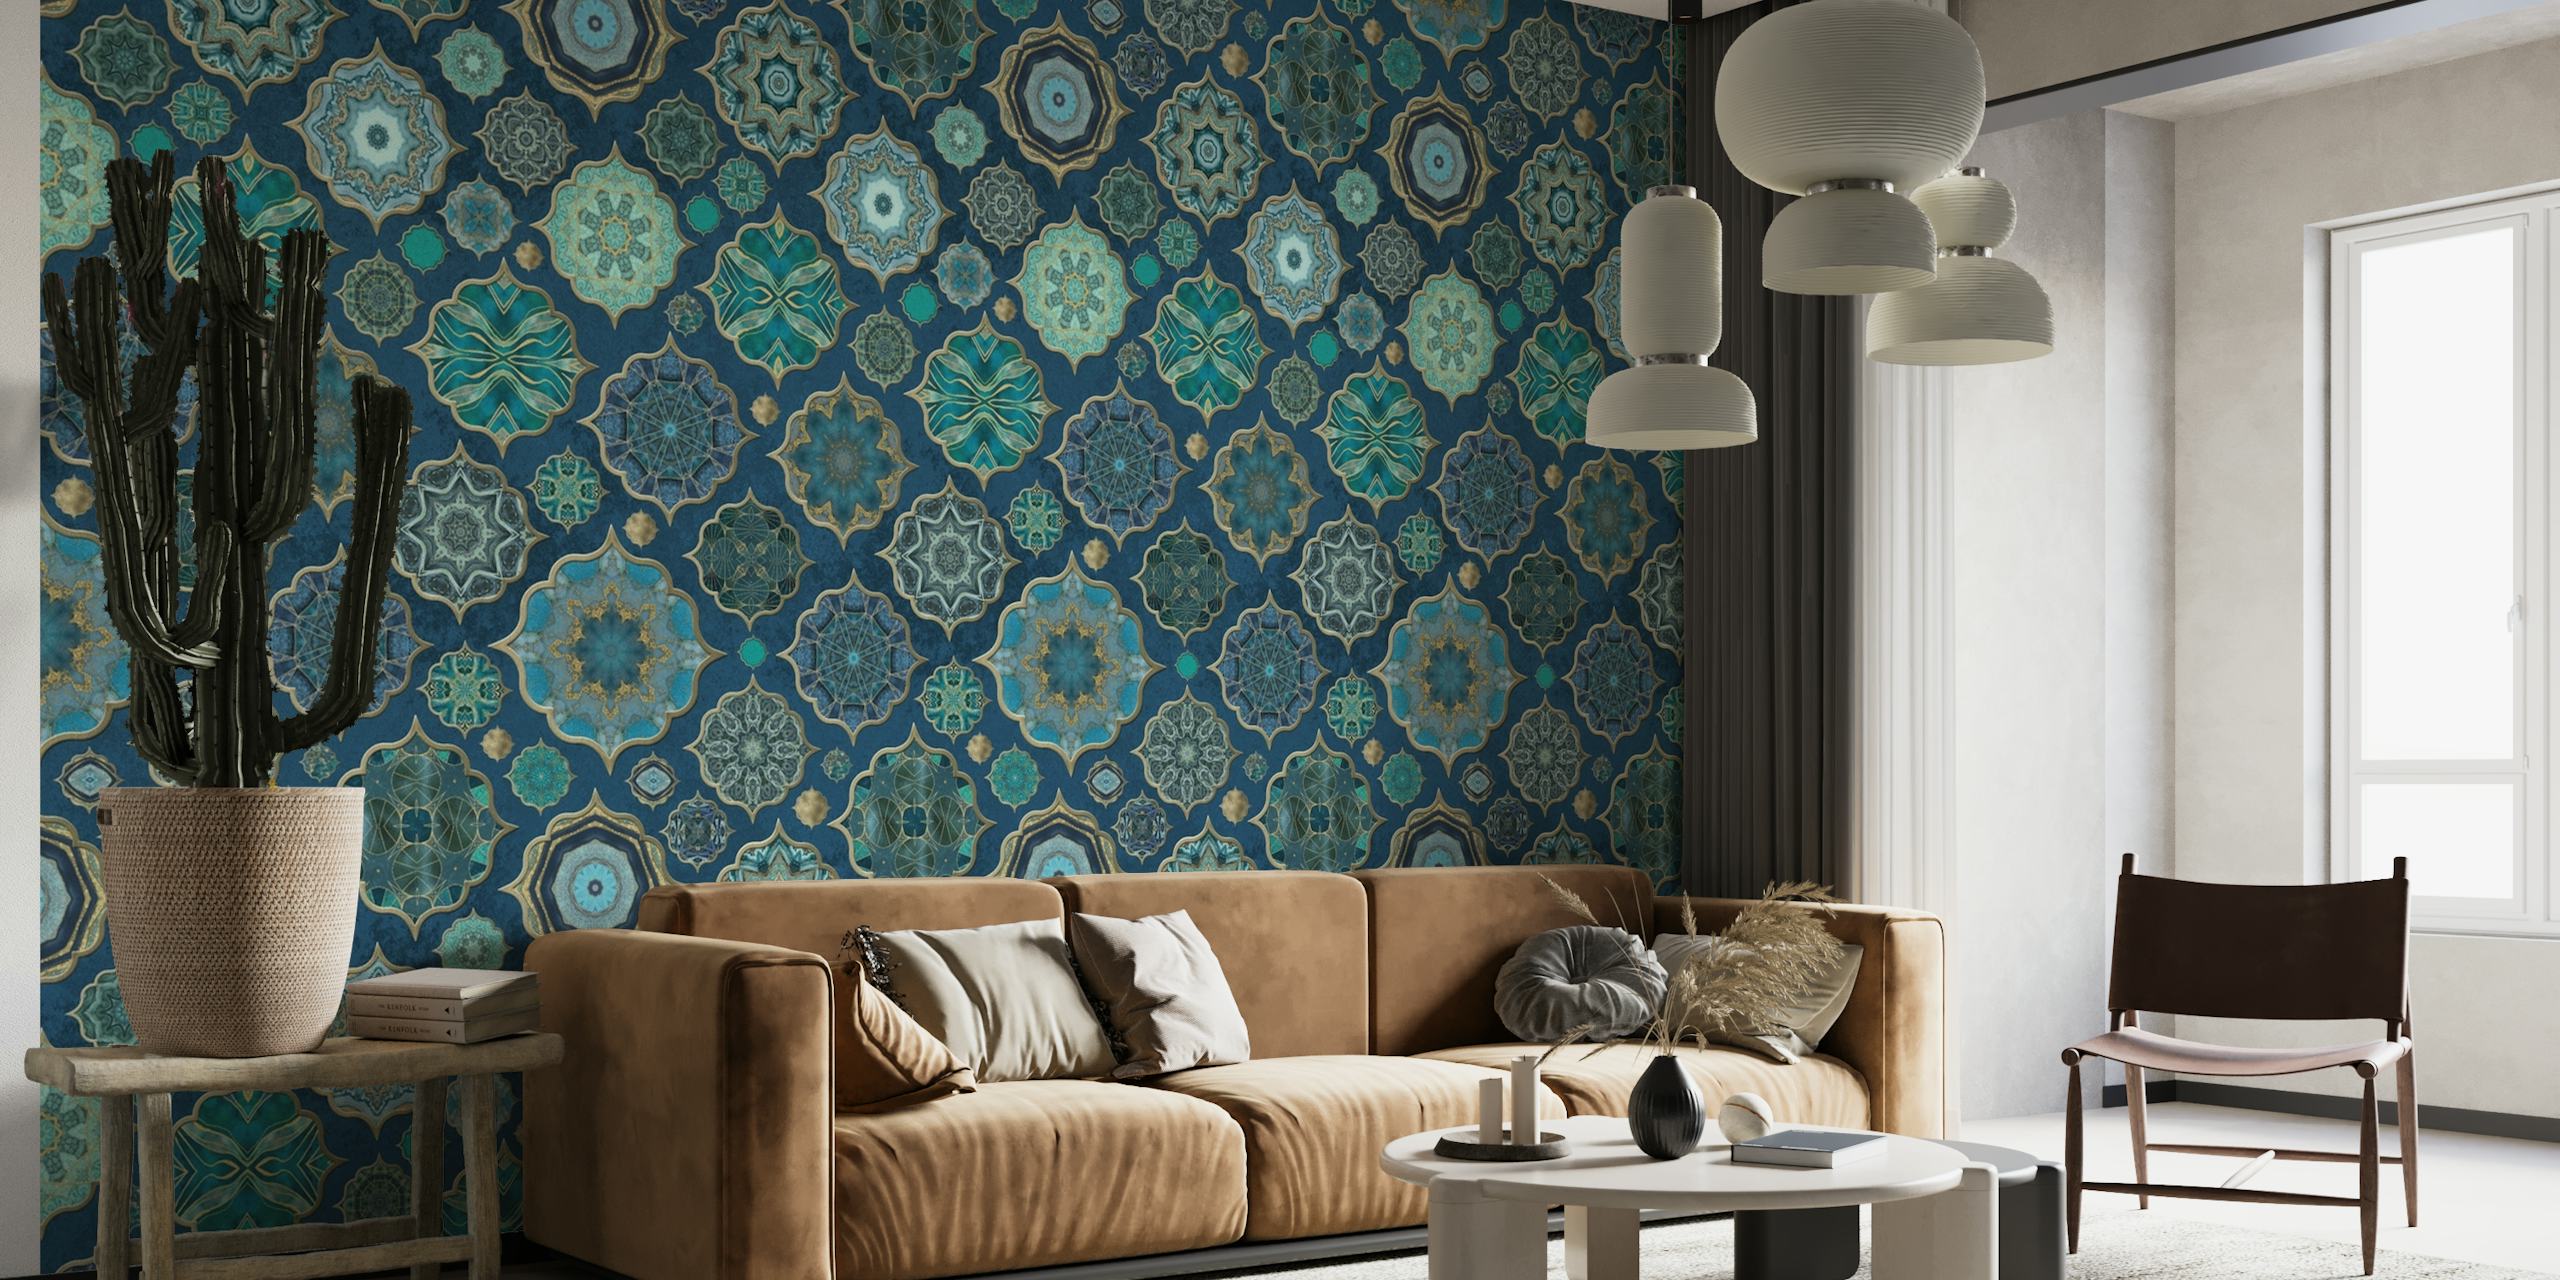 Moroccan Tiles Teal Luxury ταπετσαρία